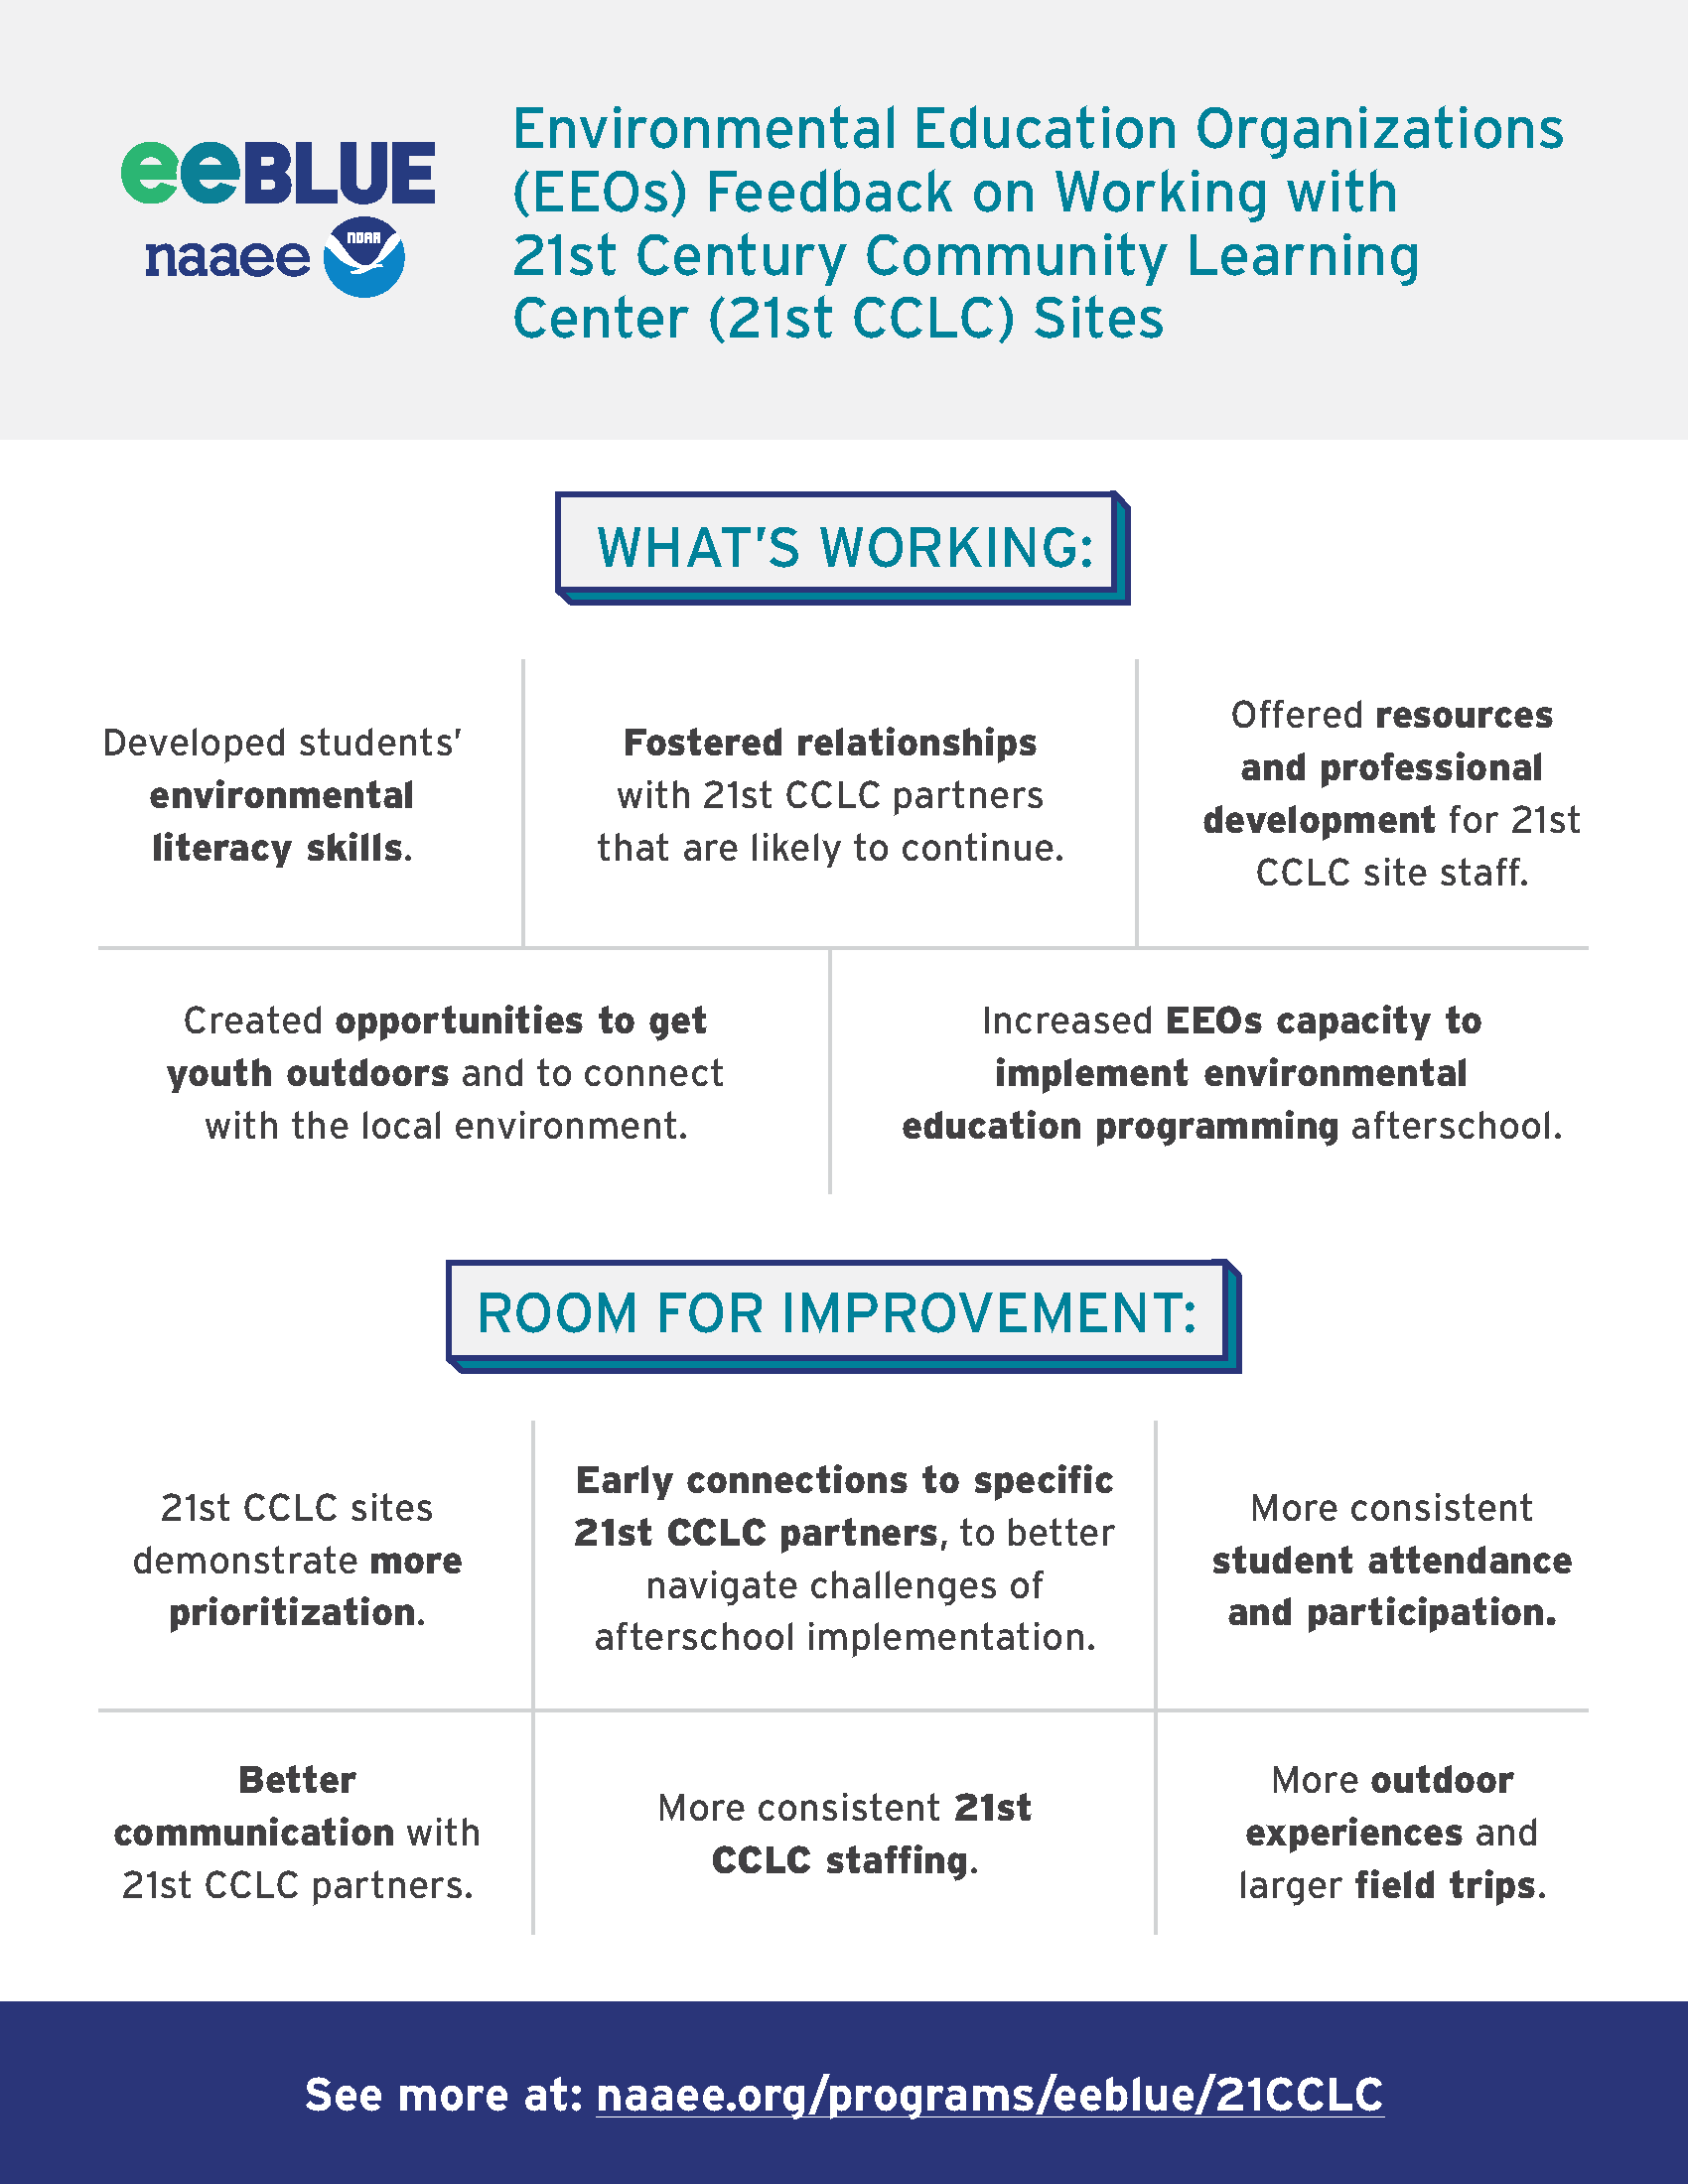 eeBLUE 21stCCLC Infographic: Environmental Education Organizations (EEOs) Feedback on Working with 21st Century Community Learning Center (21st CCLC) Sites